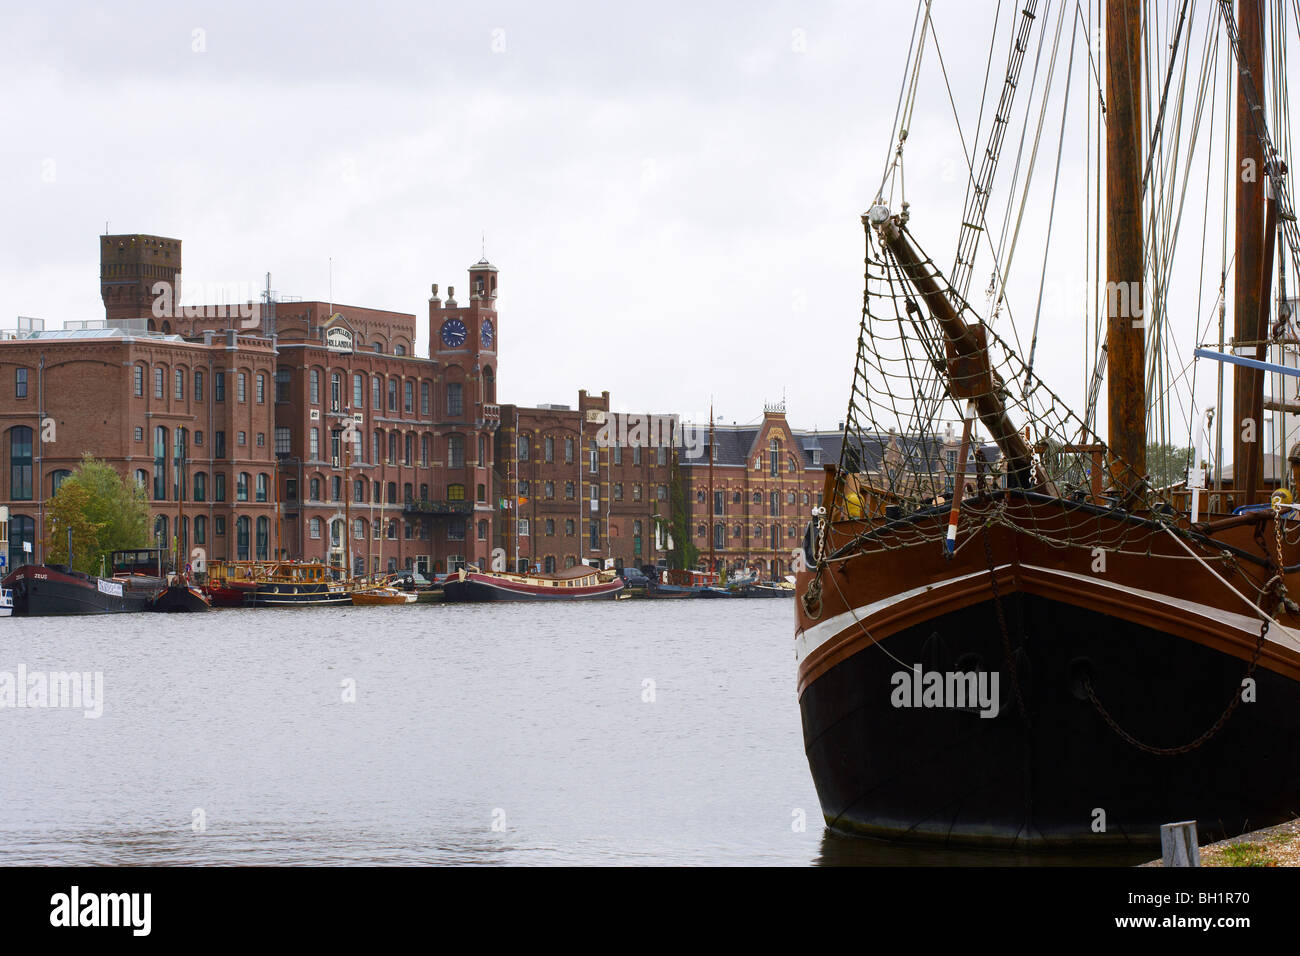 A sailing ship on the river Zaan in front of brick-lined buildings, Wormerveer, Netherlands, Europe Stock Photo